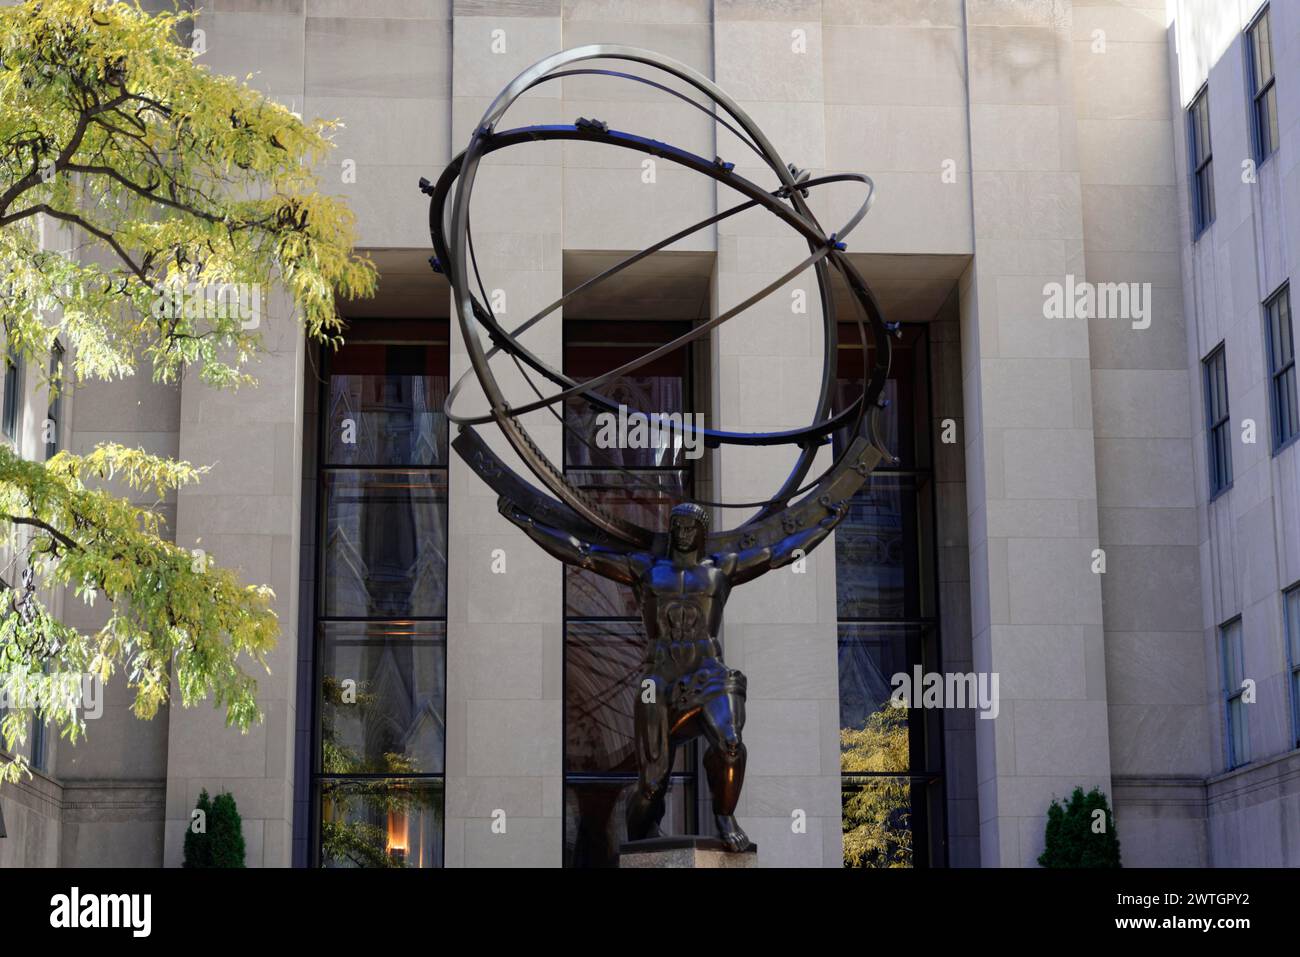 Rockefeller Center, sculpture of Atlas carrying a globe in front of a building, Manhattan, New York City, New York, USA, North America Stock Photo